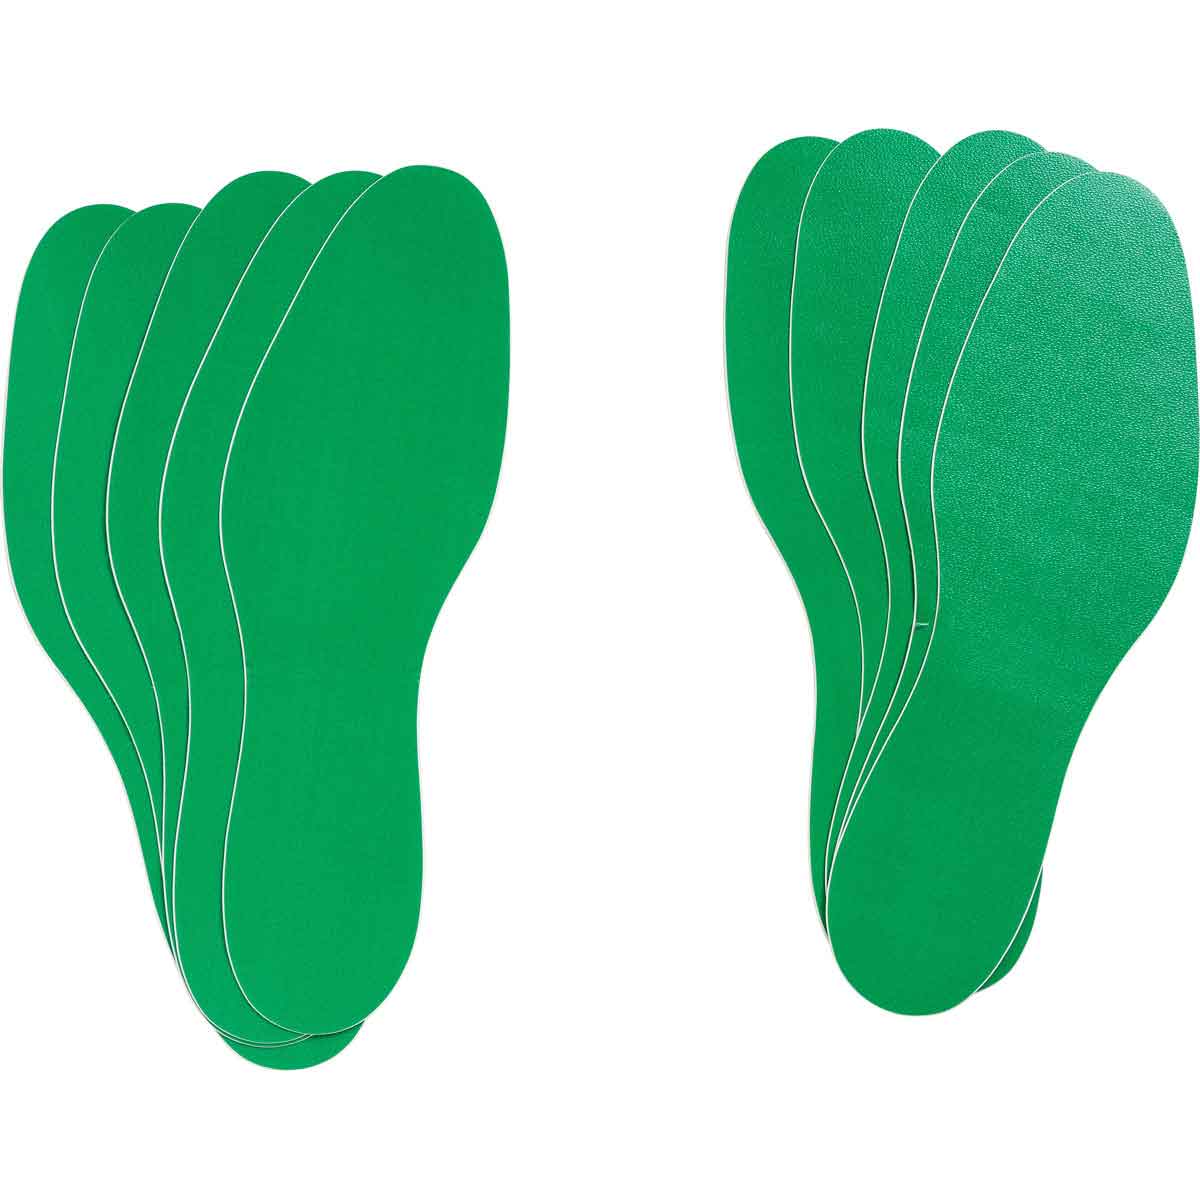 GREEN, REMOVABLE ADHESIVE